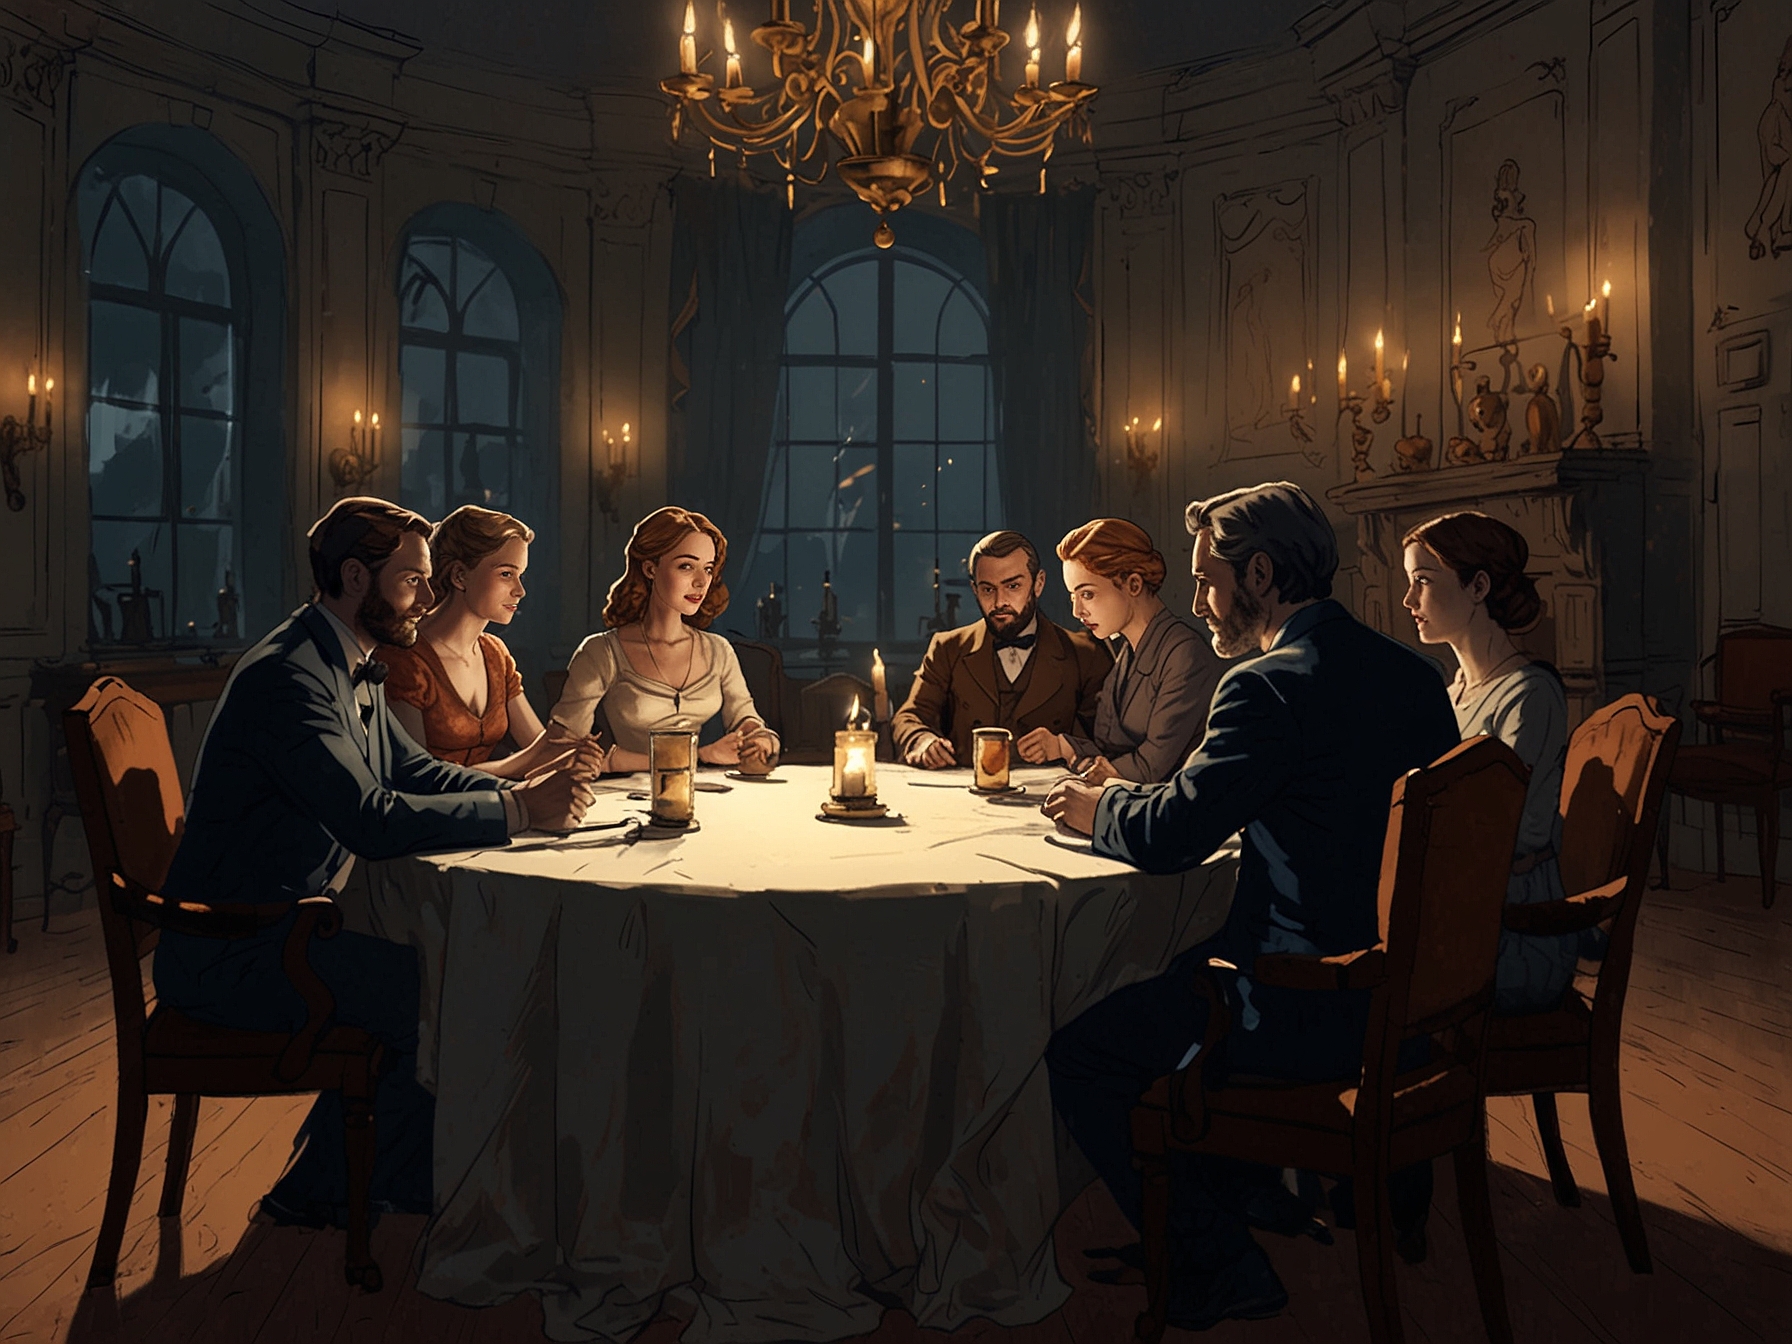 Scene indicating tension among main characters sitting around a grand table, illuminated by candlelight.